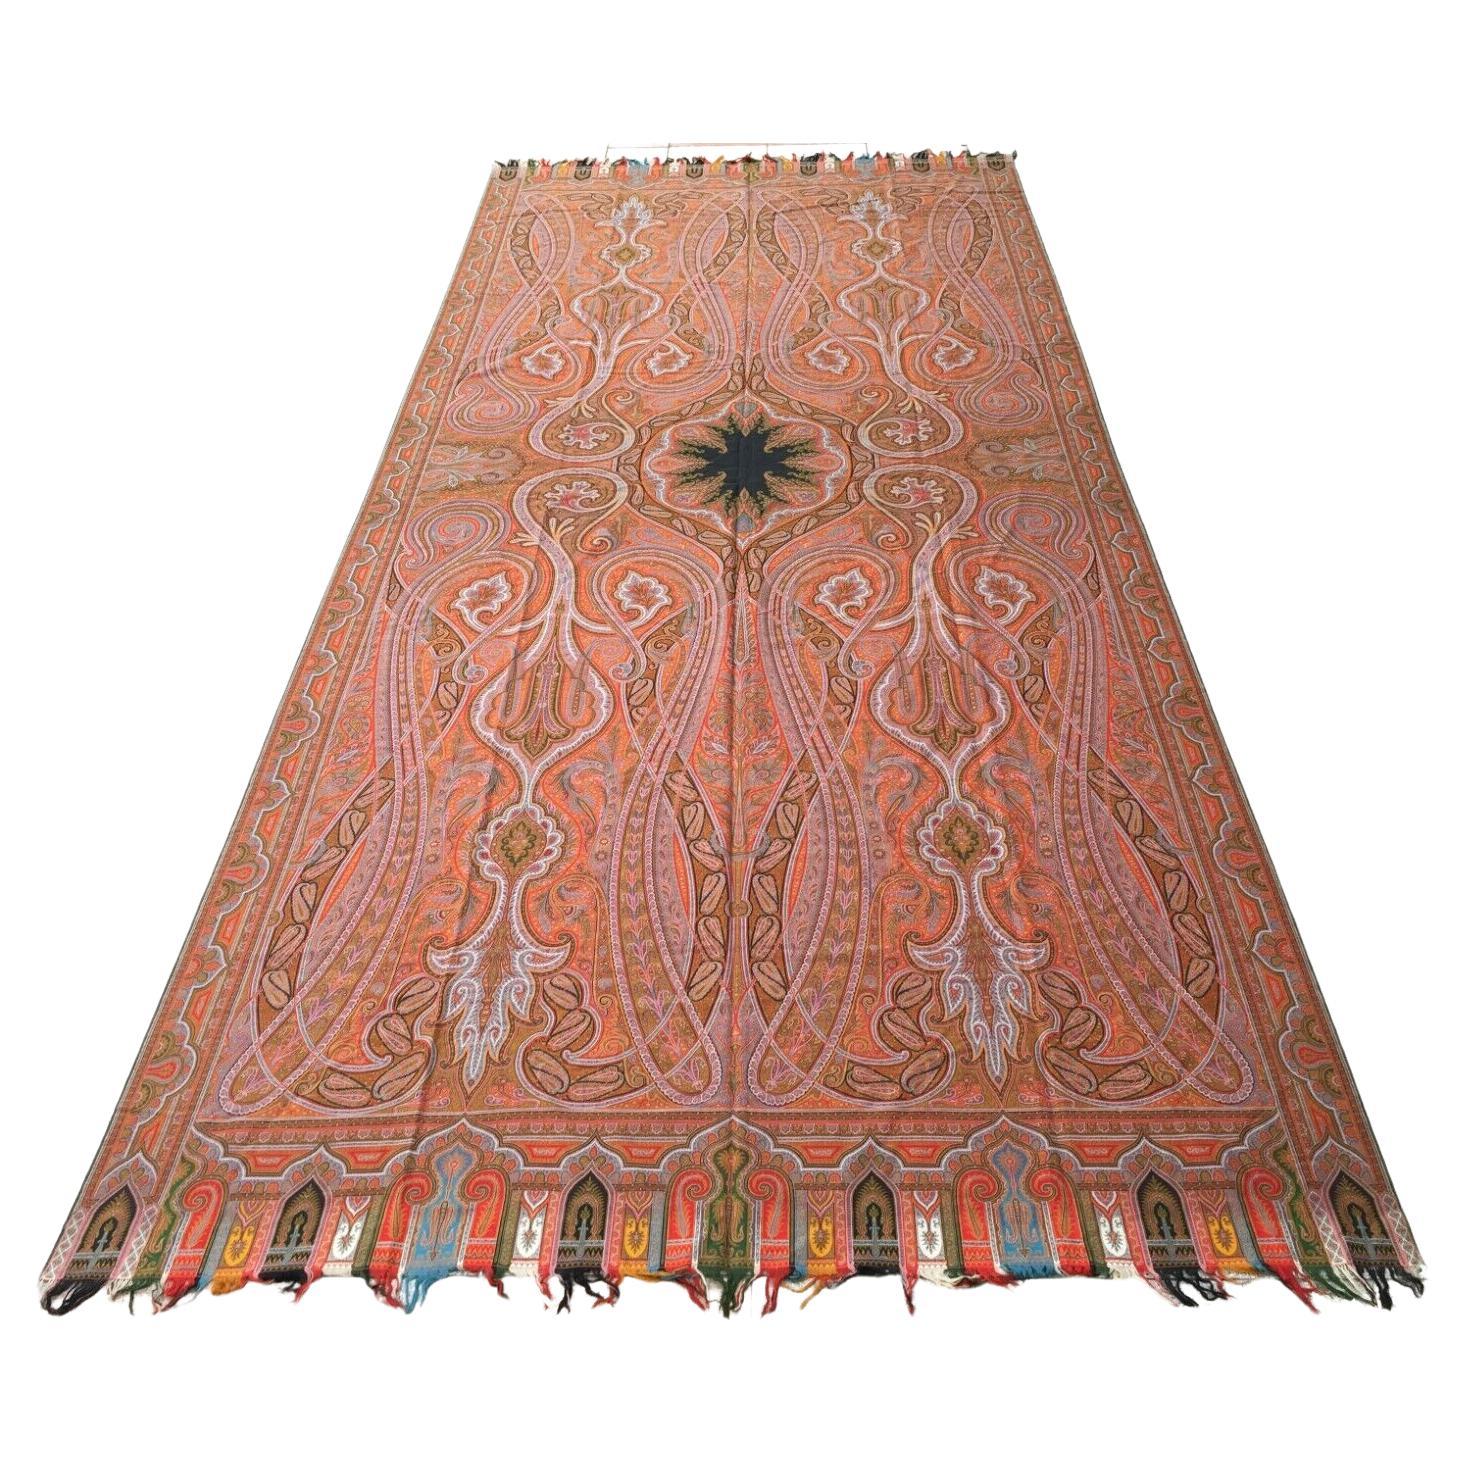 Handmade Antique Indian Cashmere Shawl 5' x 11.4', 1900s - 1W02 For Sale